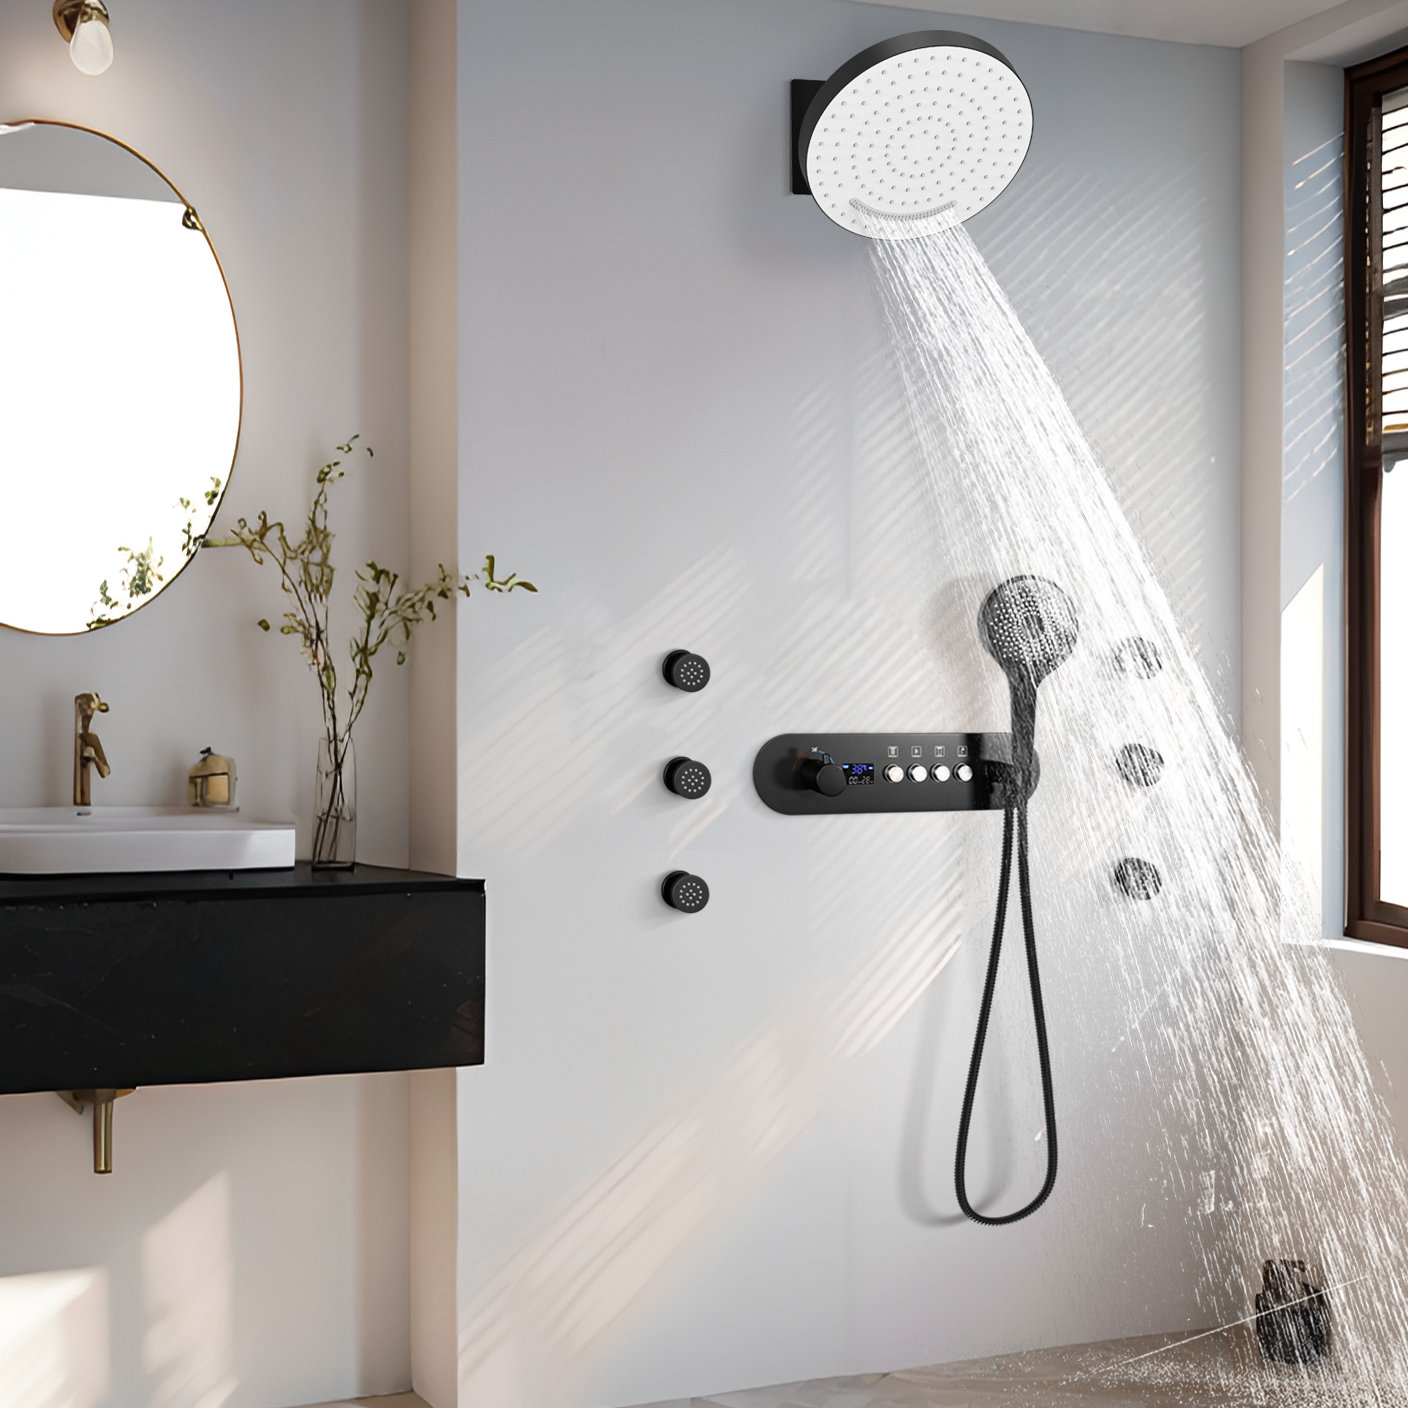 Black Flushing Wall Shower Room Suite Constant Temperature Number Explicit Shower Water Faucet